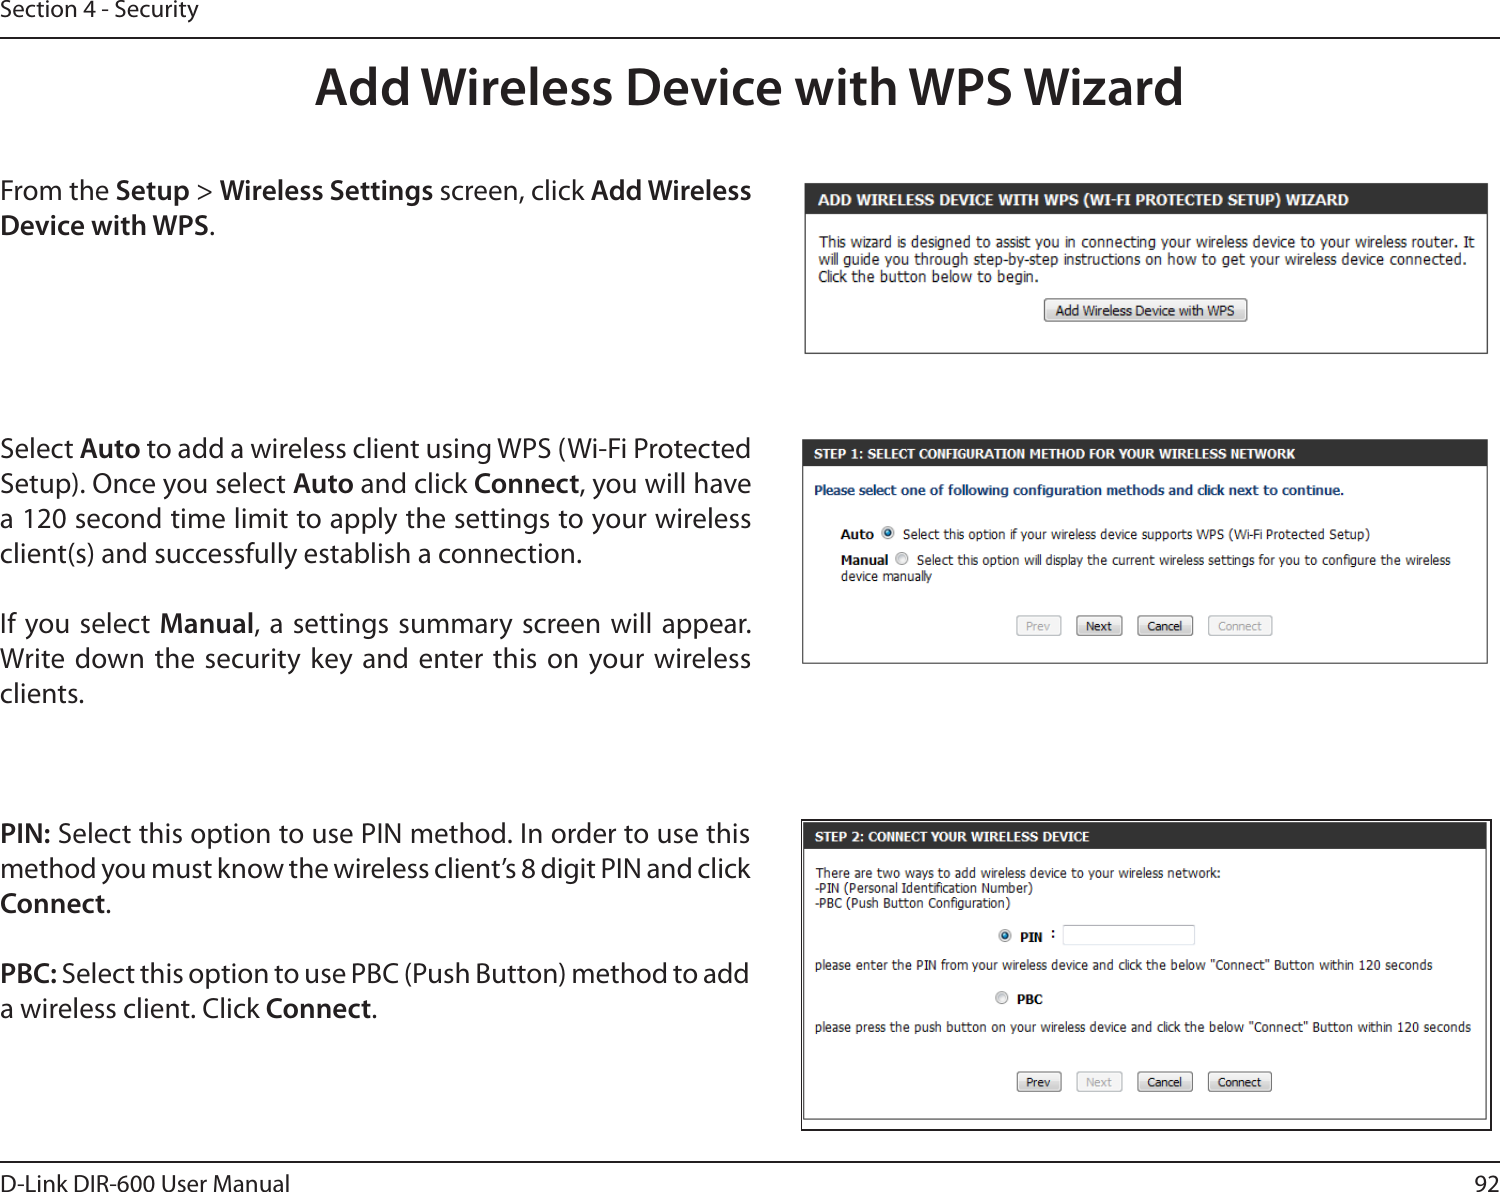 92D-Link DIR-600 User ManualSection 4 - SecurityFrom the Setup &gt; Wireless Settings screen, click Add Wireless Device with WPS.Add Wireless Device with WPS WizardPIN: Select this option to use PIN method. In order to use this method you must know the wireless client’s 8 digit PIN and click Connect.PBC: Select this option to use PBC (Push Button) method to add a wireless client. Click Connect.Select Auto to add a wireless client using WPS (Wi-Fi Protected Setup). Once you select Auto and click Connect, you will have a 120 second time limit to apply the settings to your wireless client(s) and successfully establish a connection. If you select Manual, a settings  summary screen will  appear. Write down the security key and  enter this  on your wireless clients. 